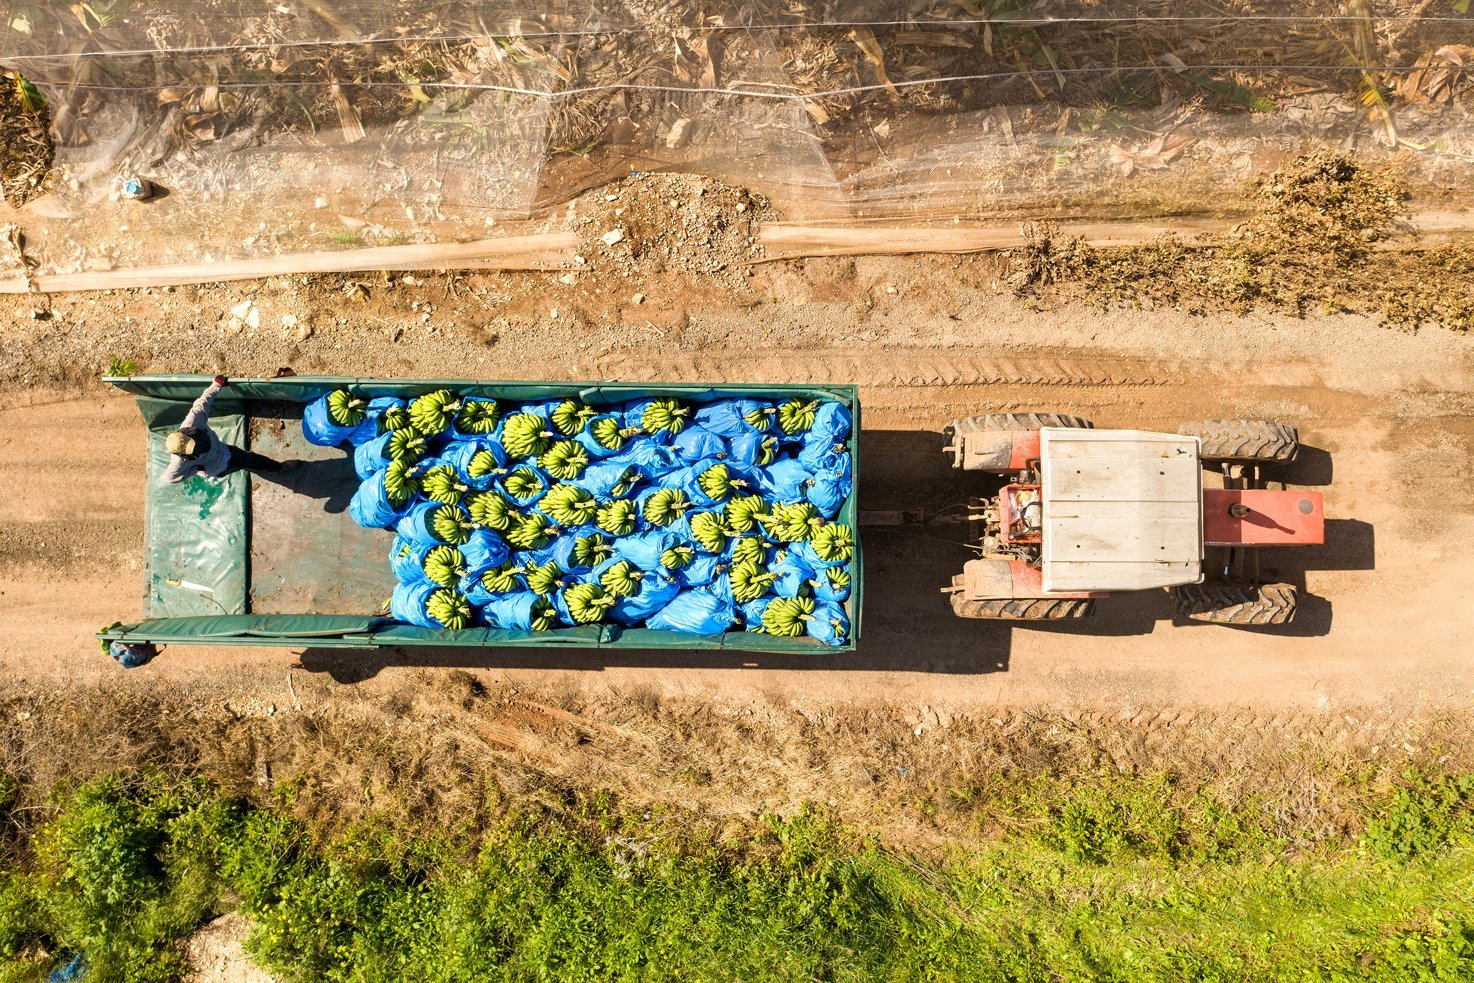 Bananentransport. Foto: liorpt / iStock / Getty Images Plus / getty Images